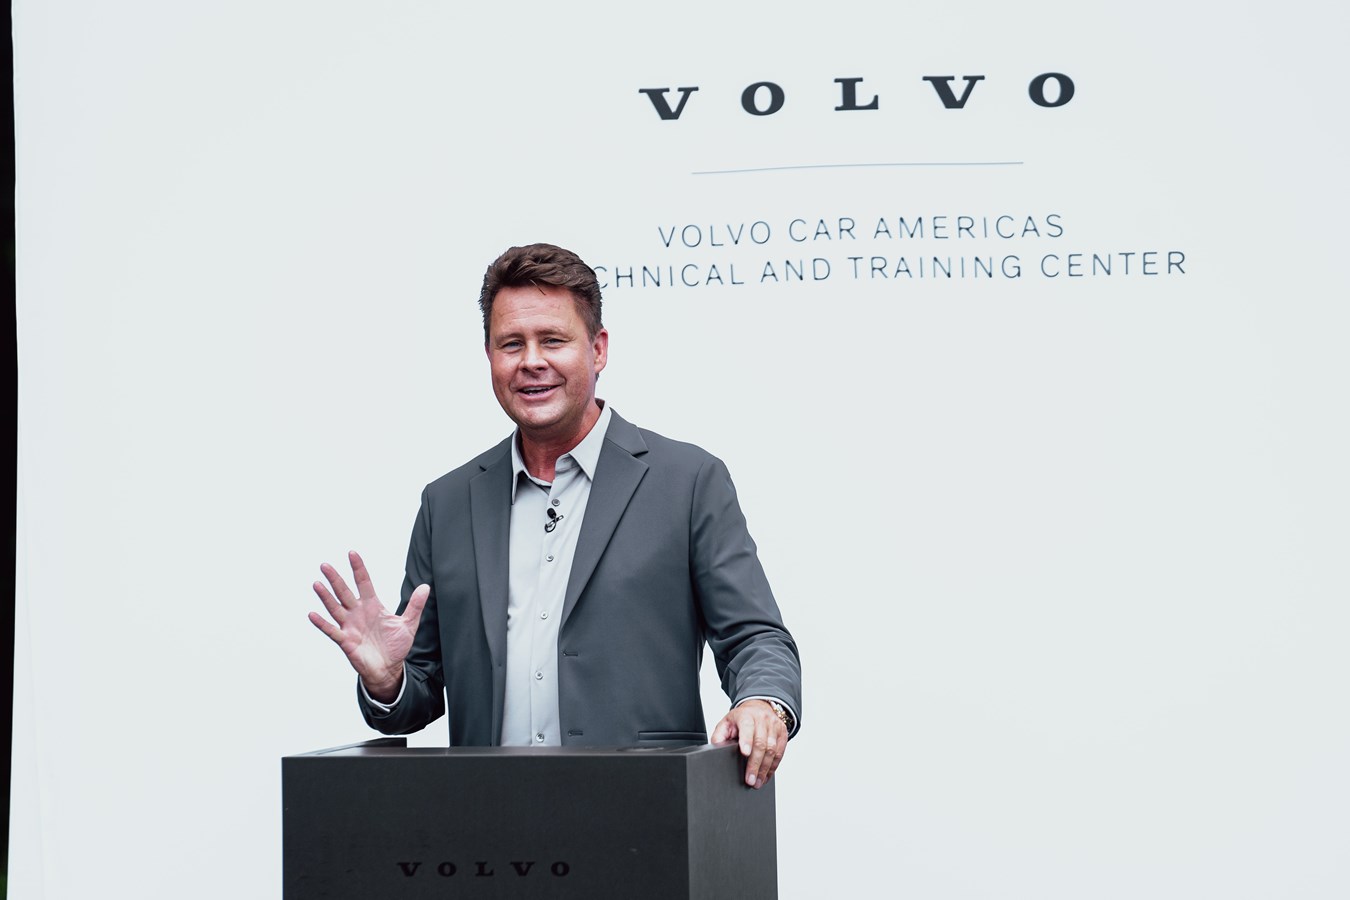 Anders Gustafsson, Senior Vice President Volvo Cars Americas and President and CEO, Volvo Car USA, makes remarks at the groundbreaking of the Technical and Training Center at the Volvo Car Americas headquarters in Mahwah, N.J.